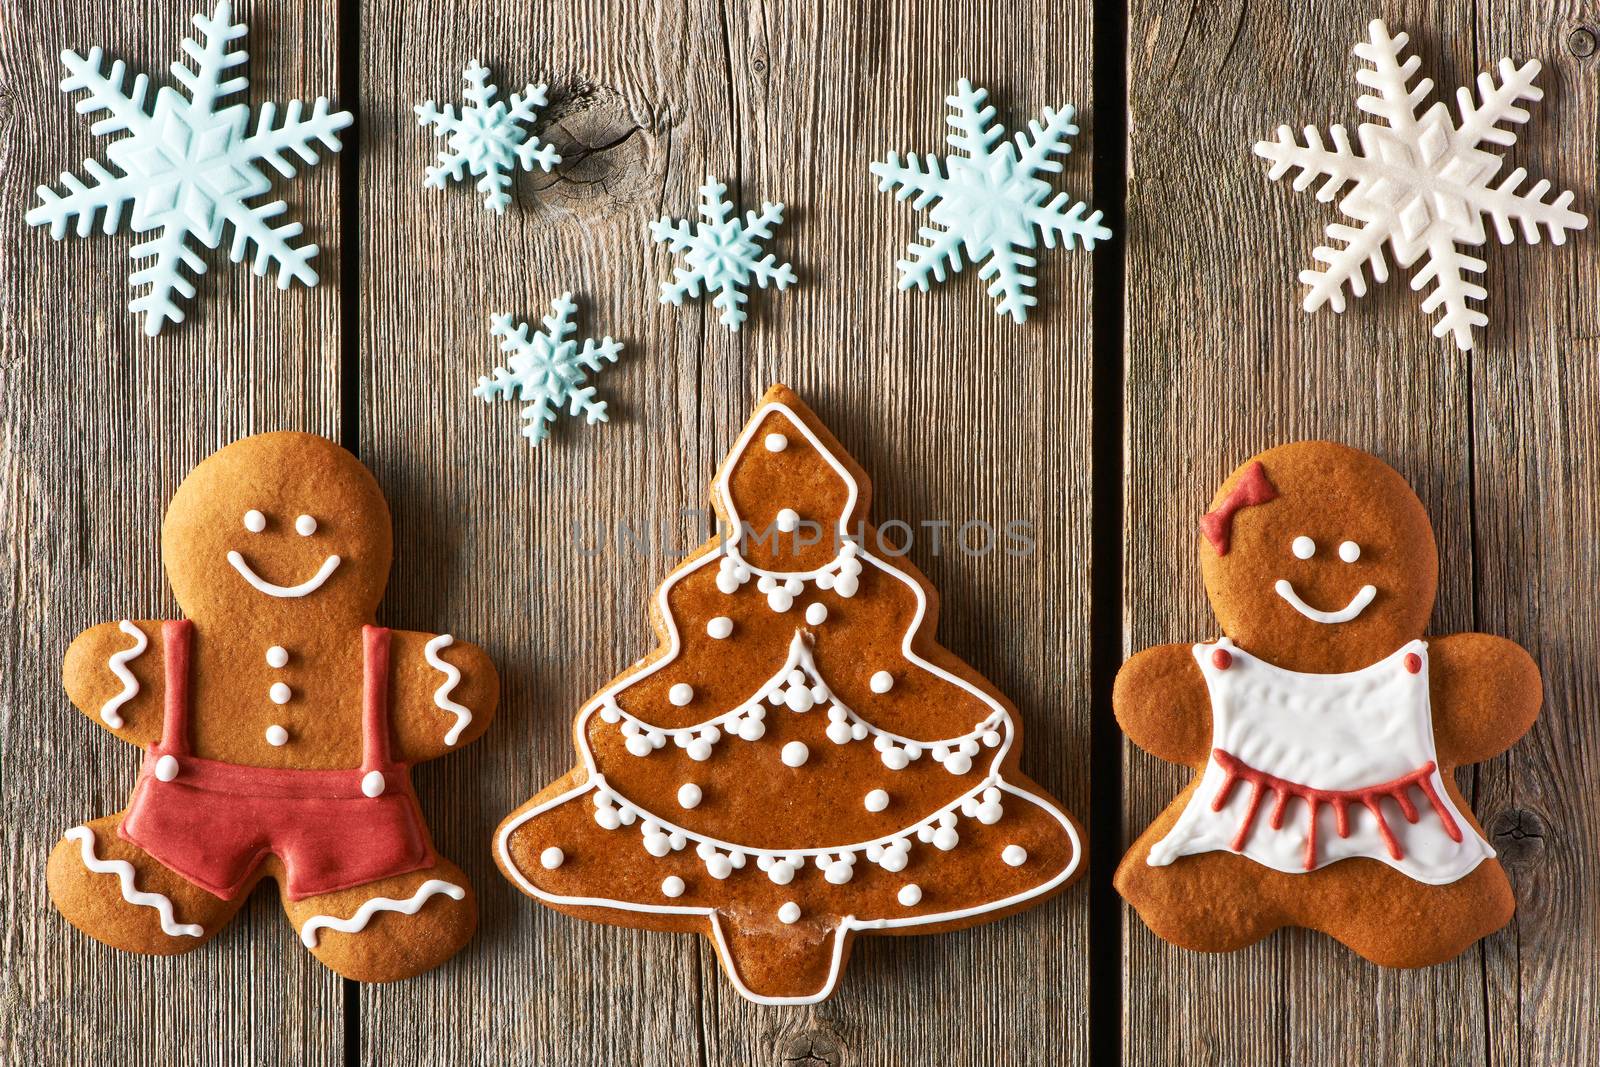 Christmas homemade gingerbread couple and tree on wooden table